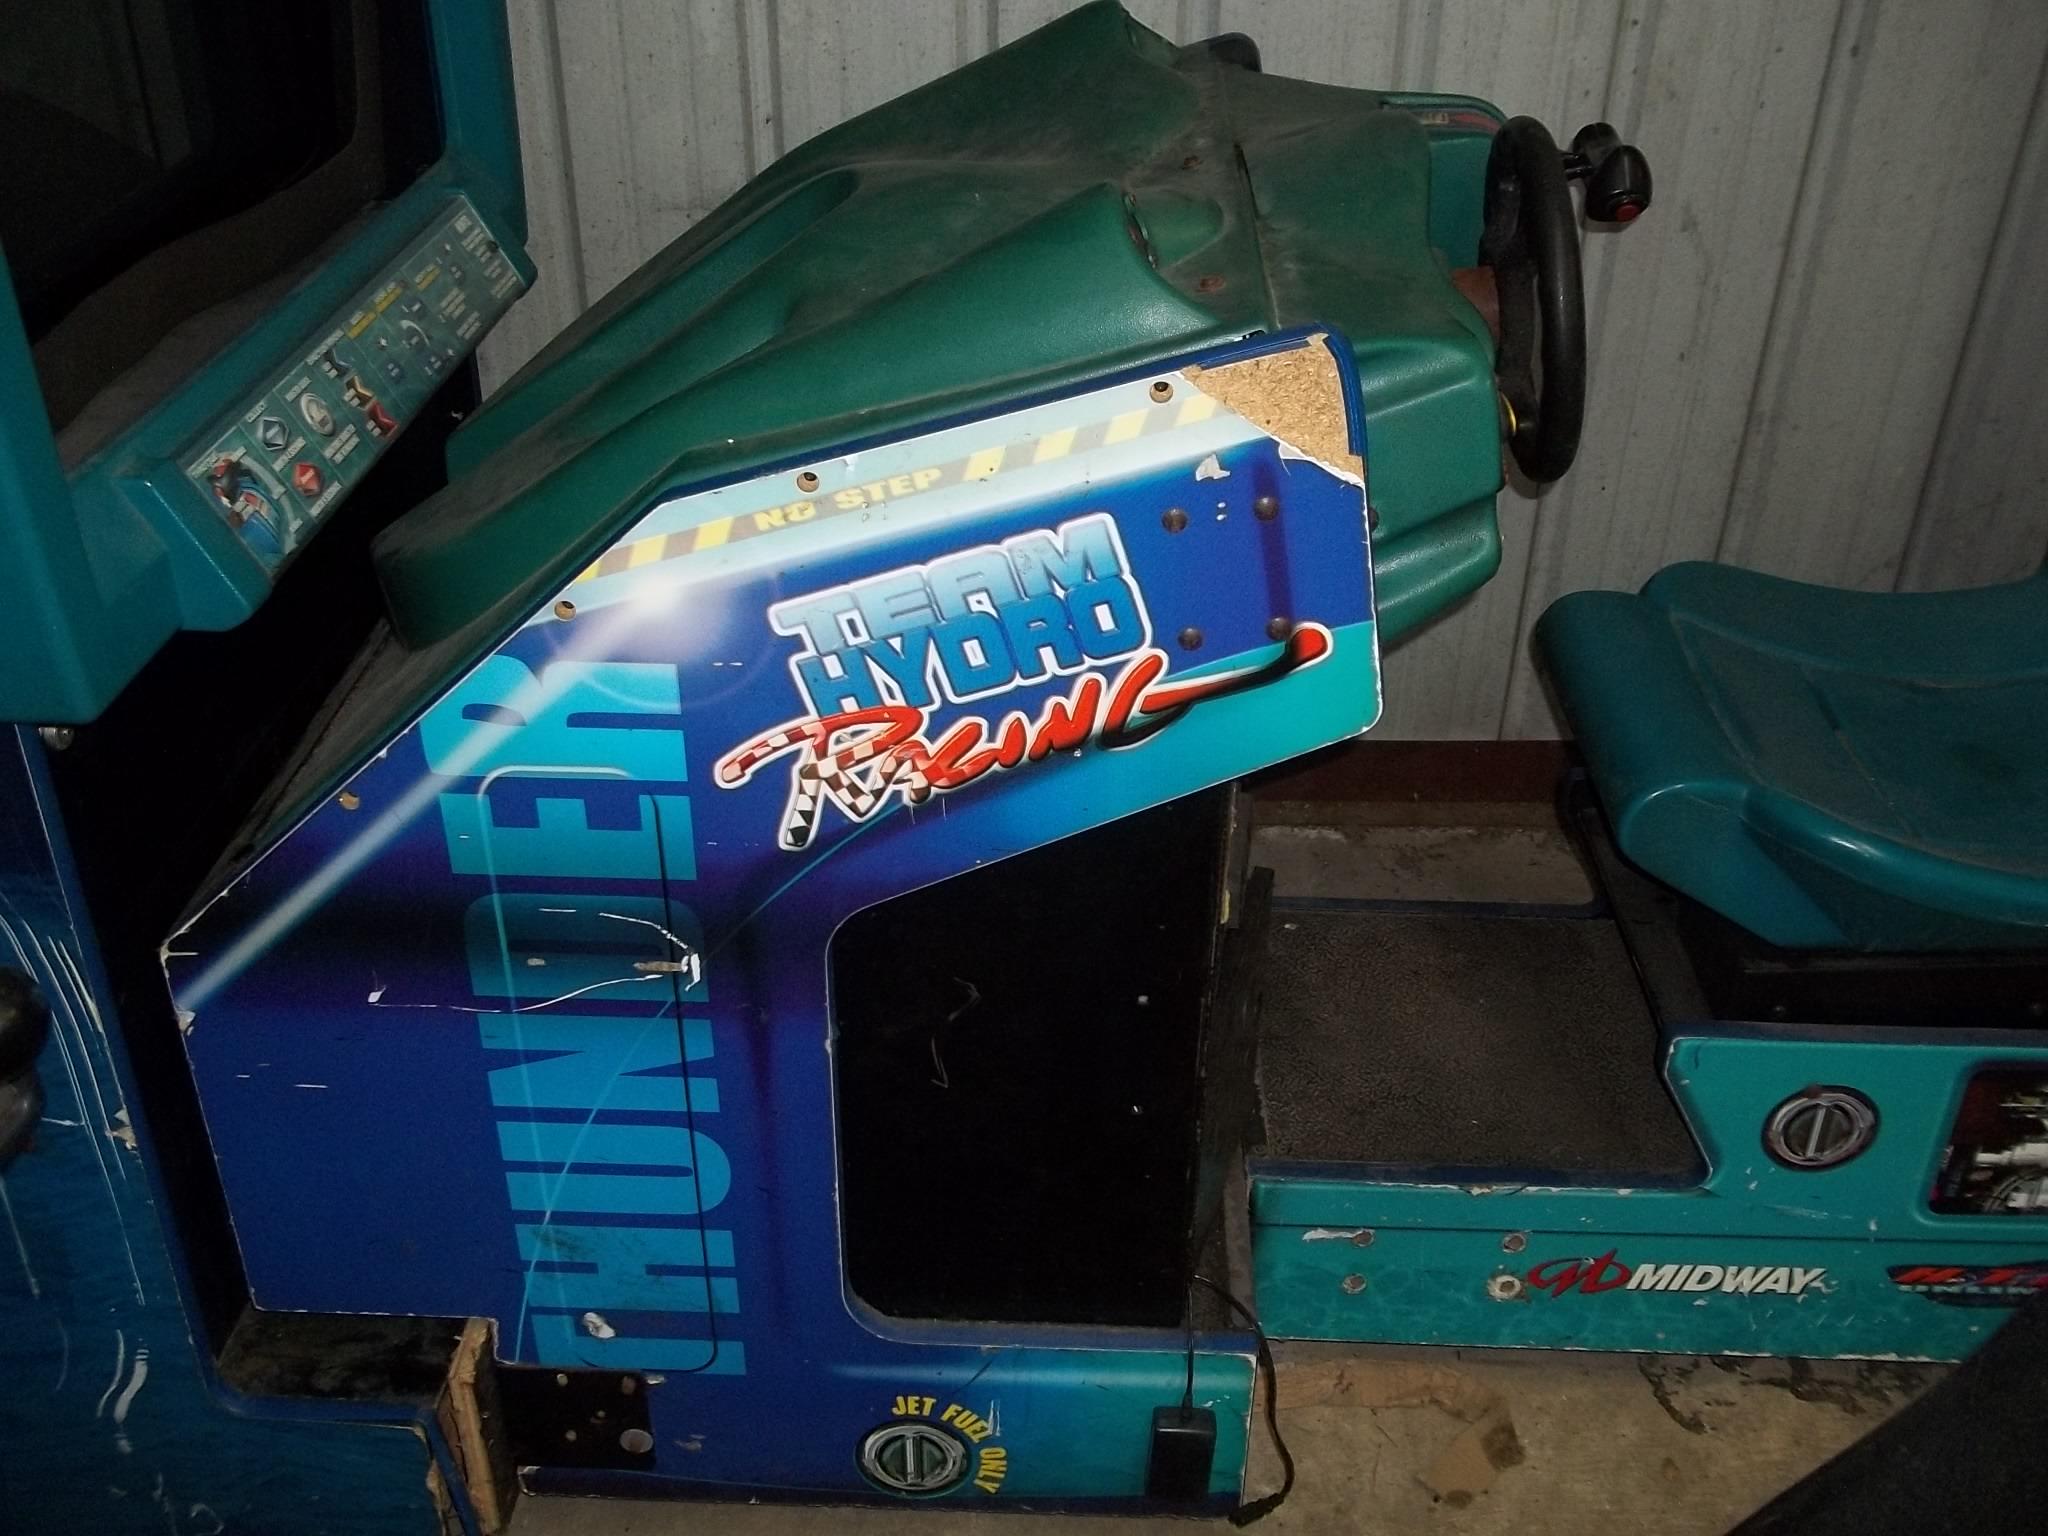 Midway Hydro Thunder Driving Arcade Game